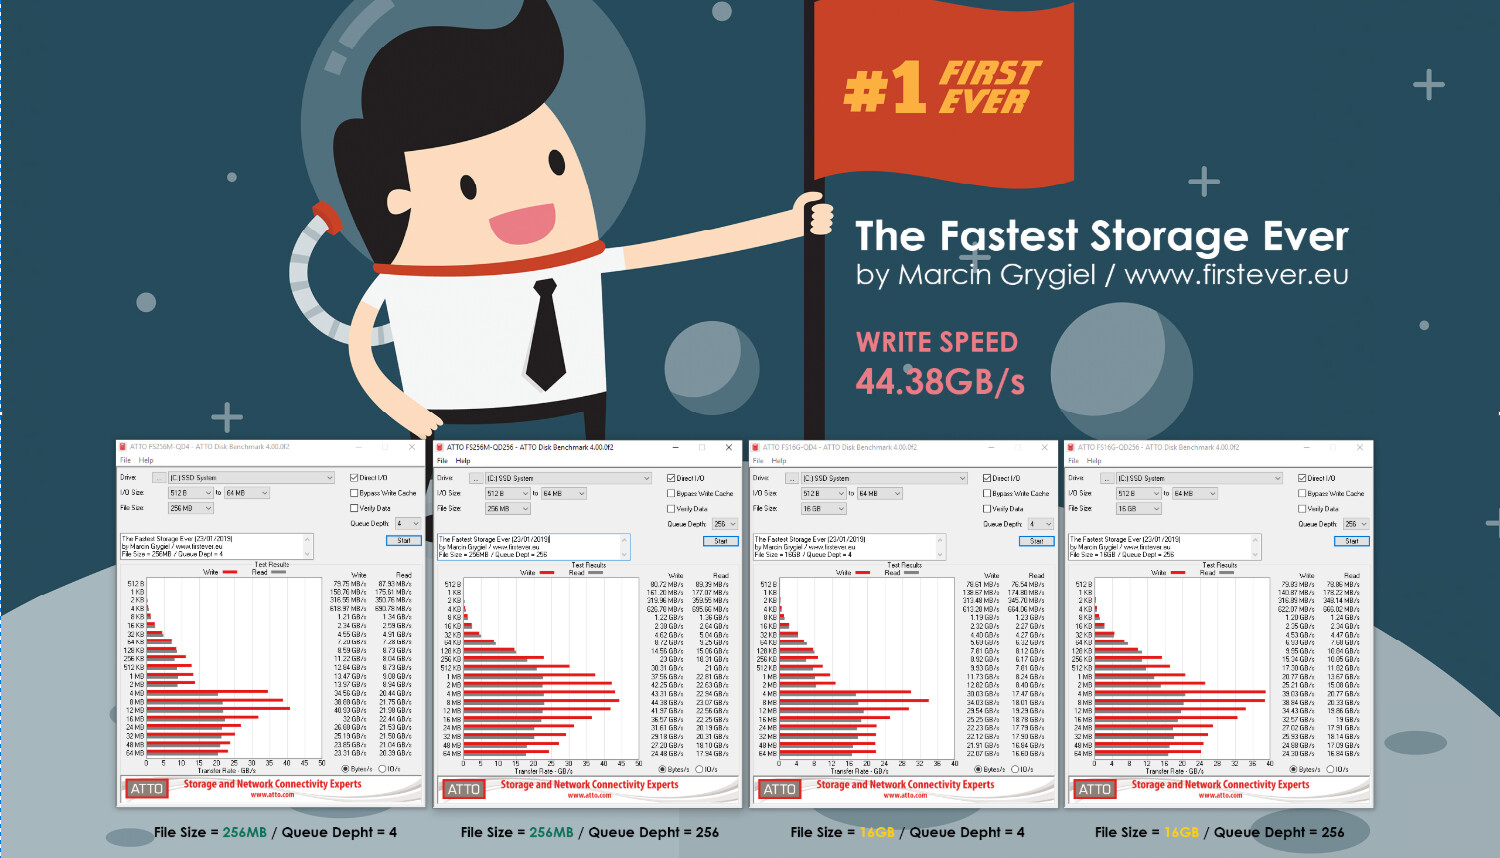 The fastest storage ever - Pic2.jpg